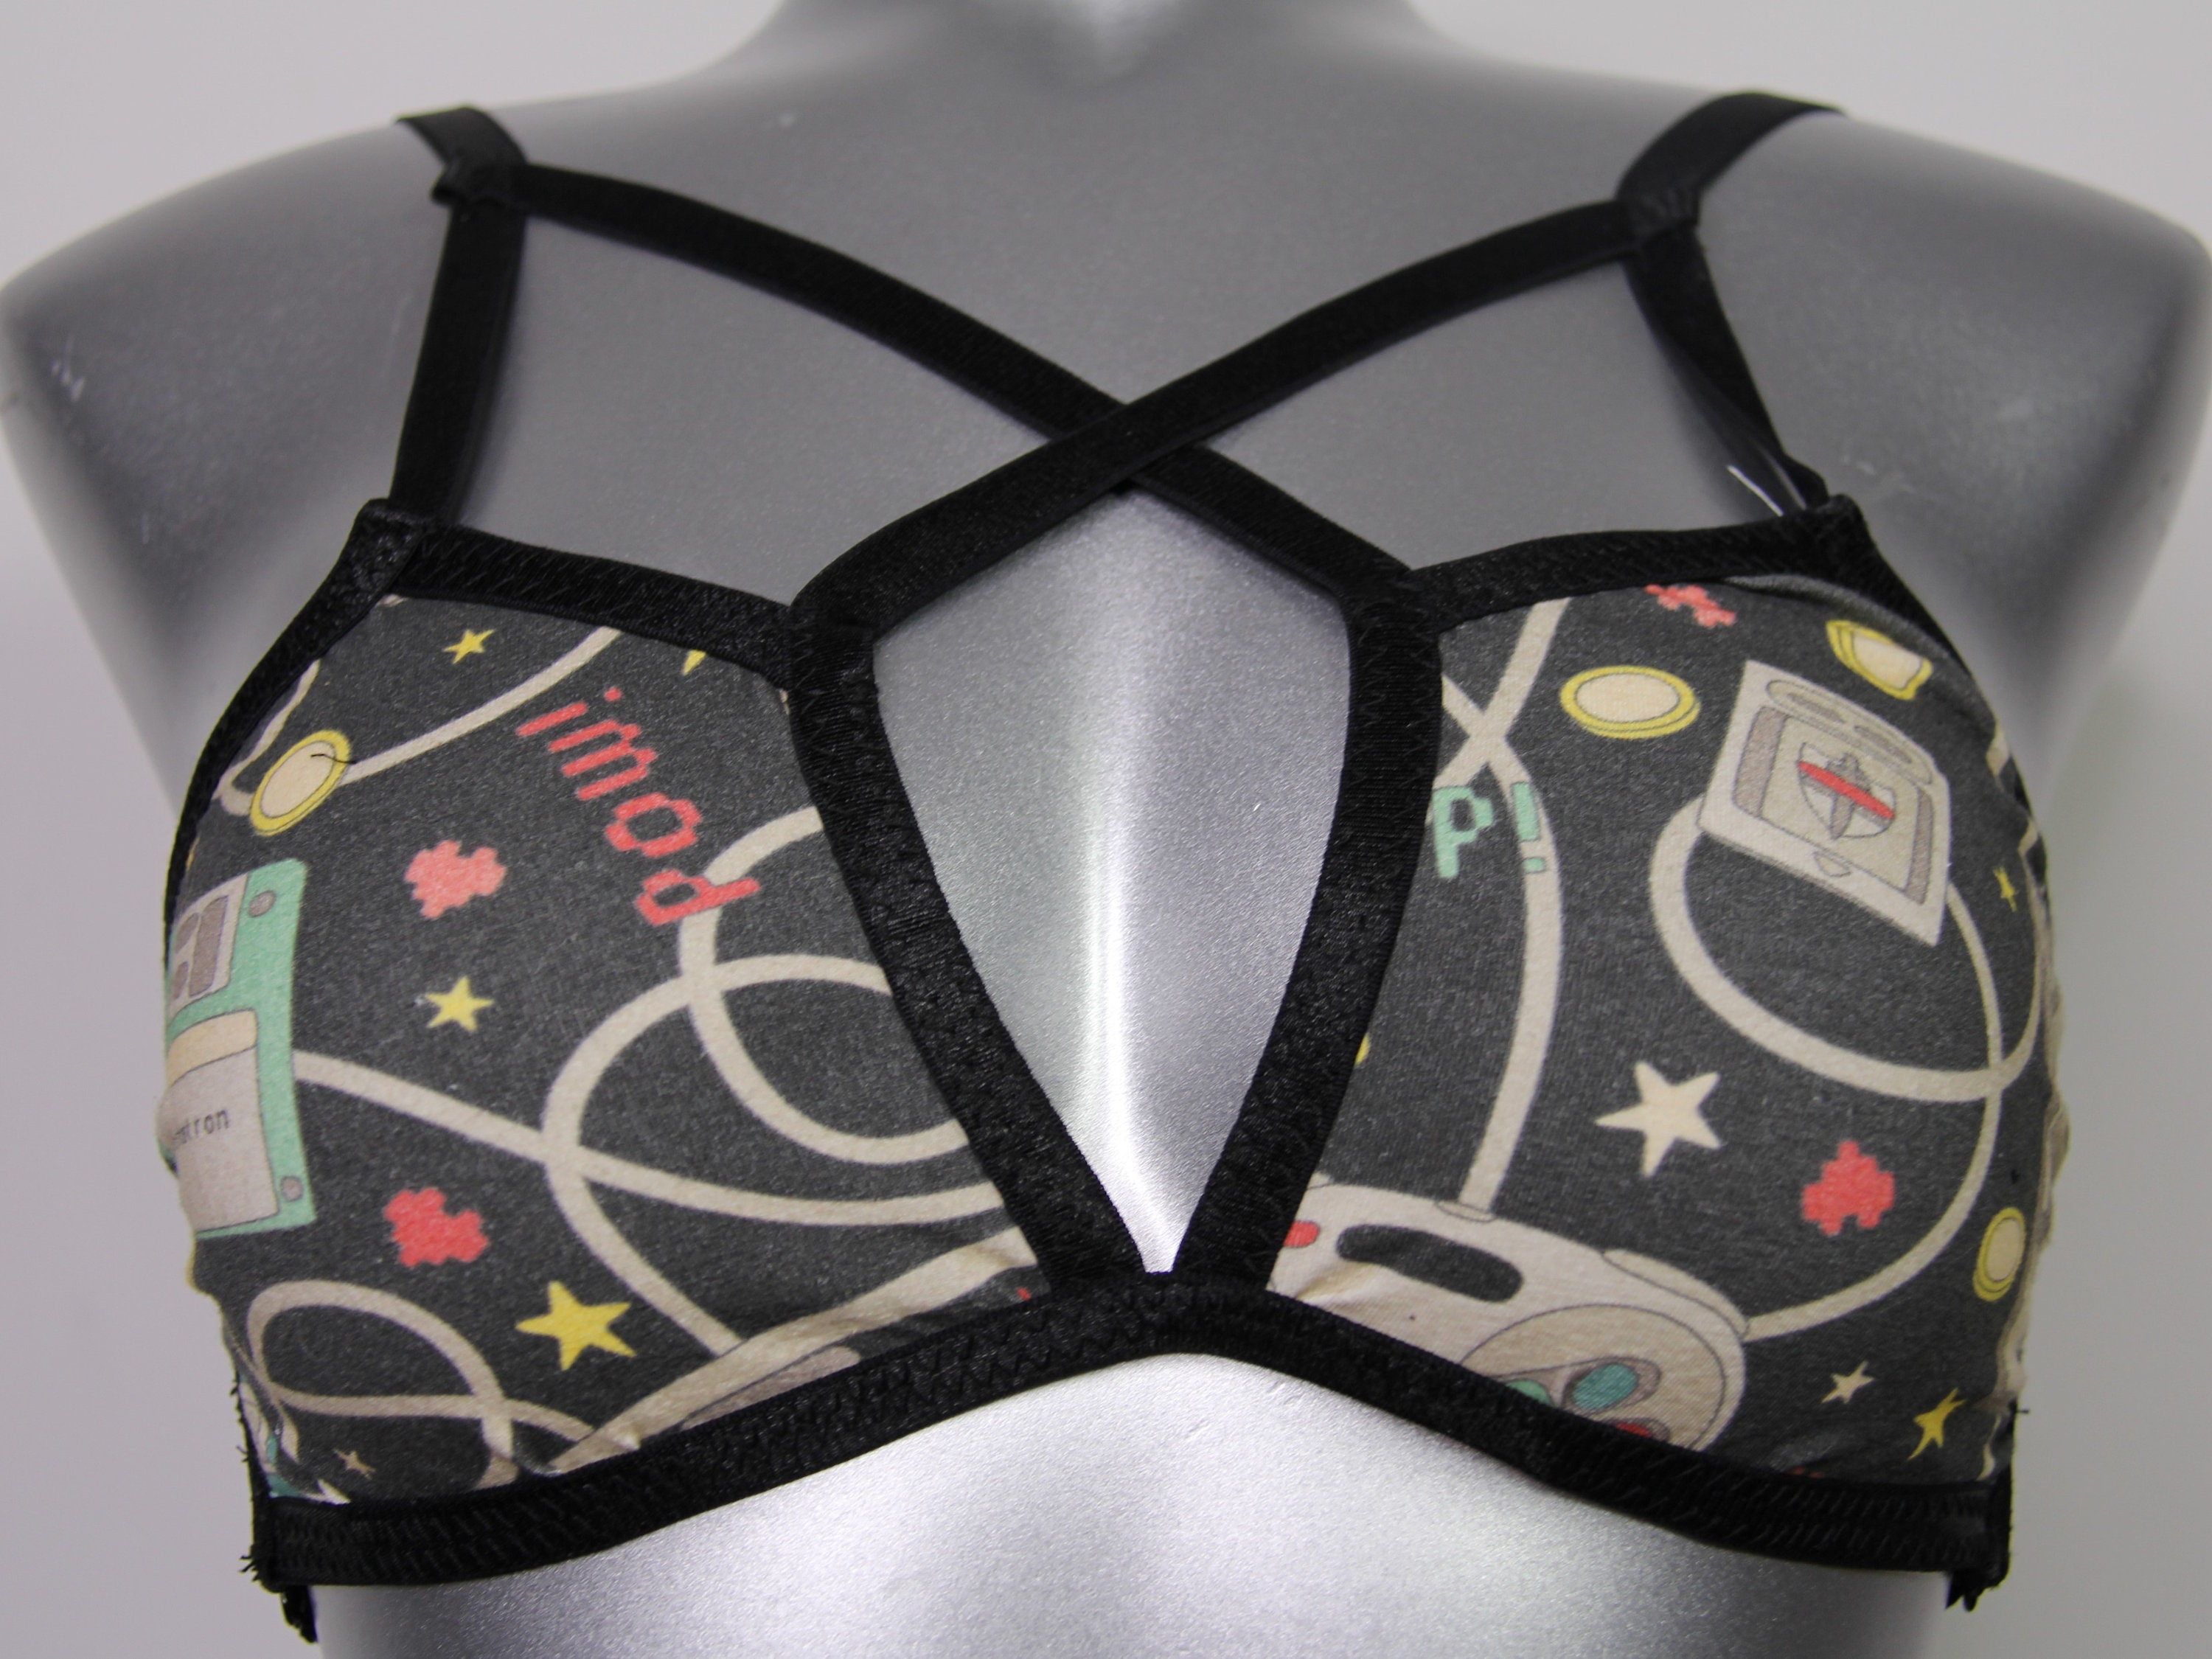 10 fun and geeky bras for gamers